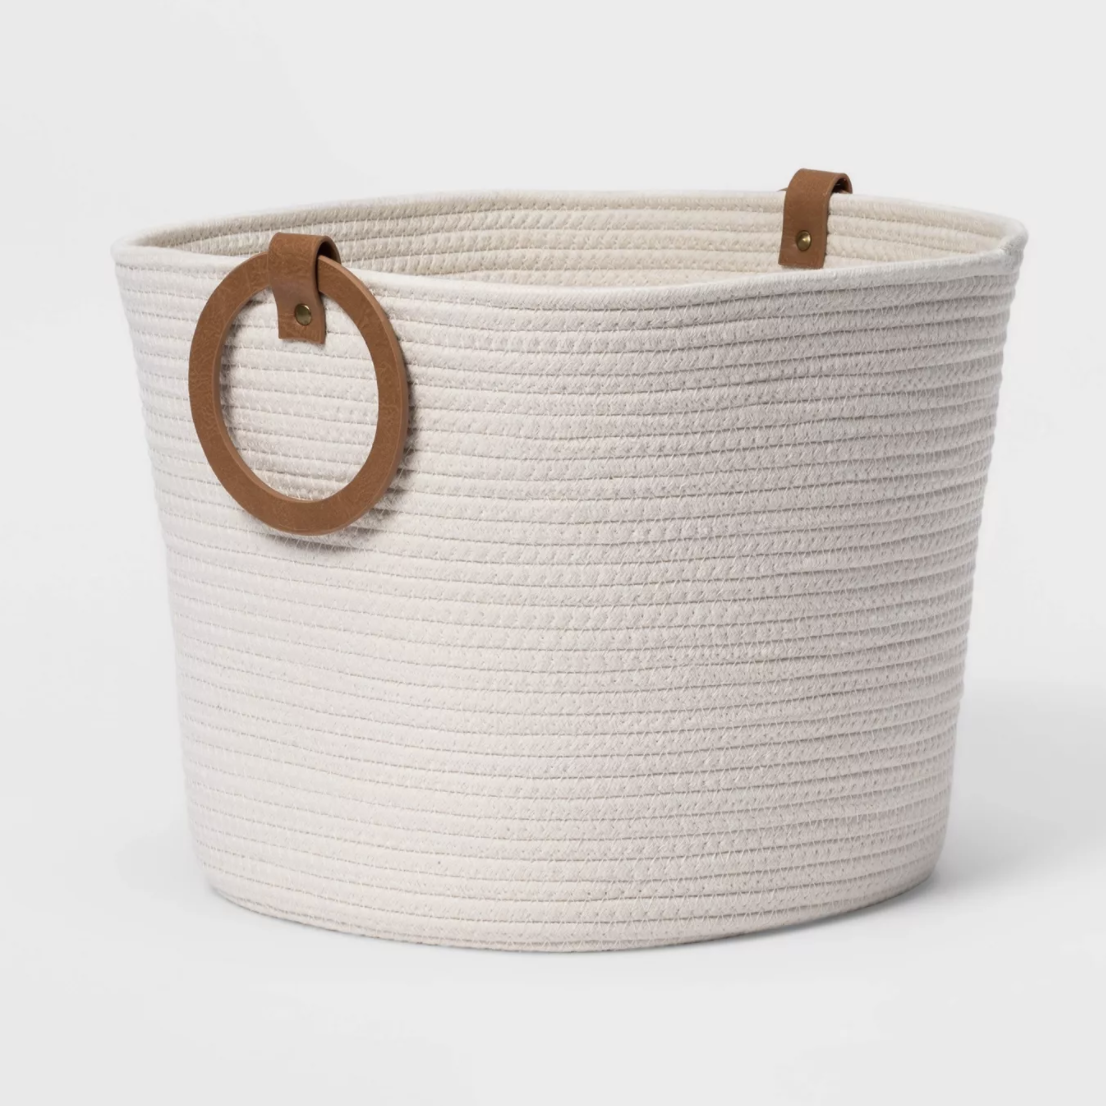 the white basket with a leather handle